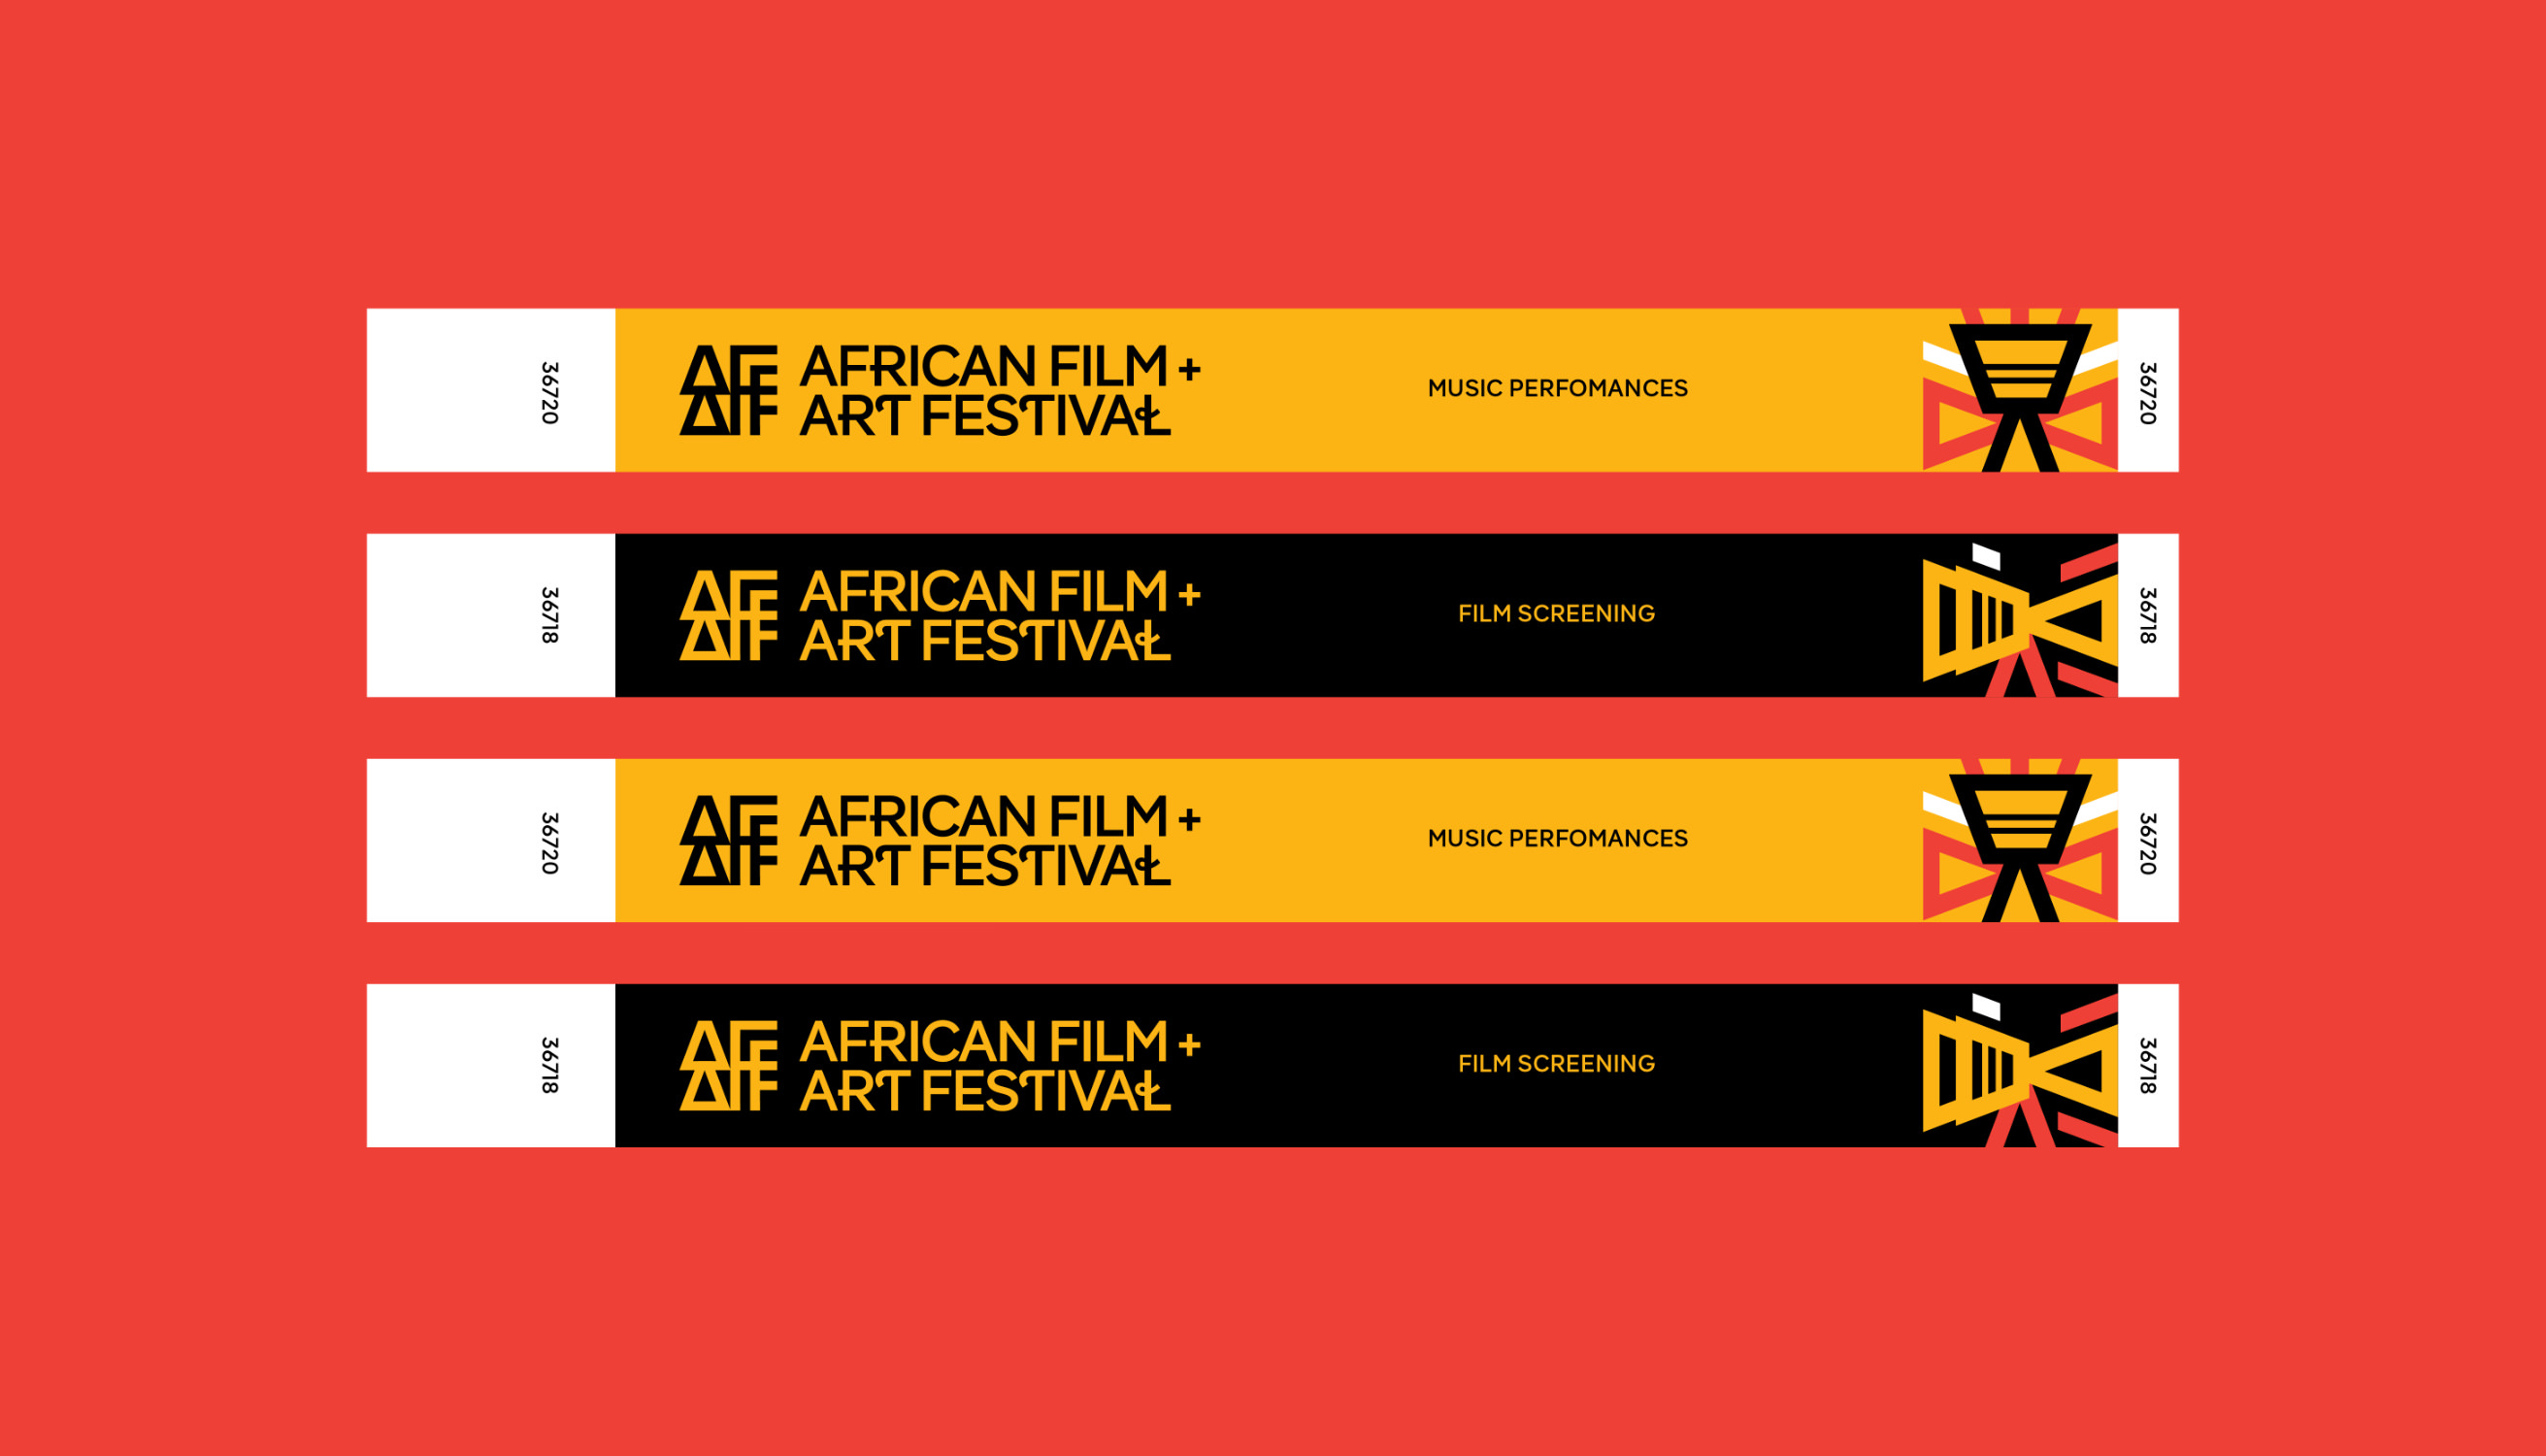 The African version of the inclusive font family Pangea serves as the house font for the African Film & Art Festival